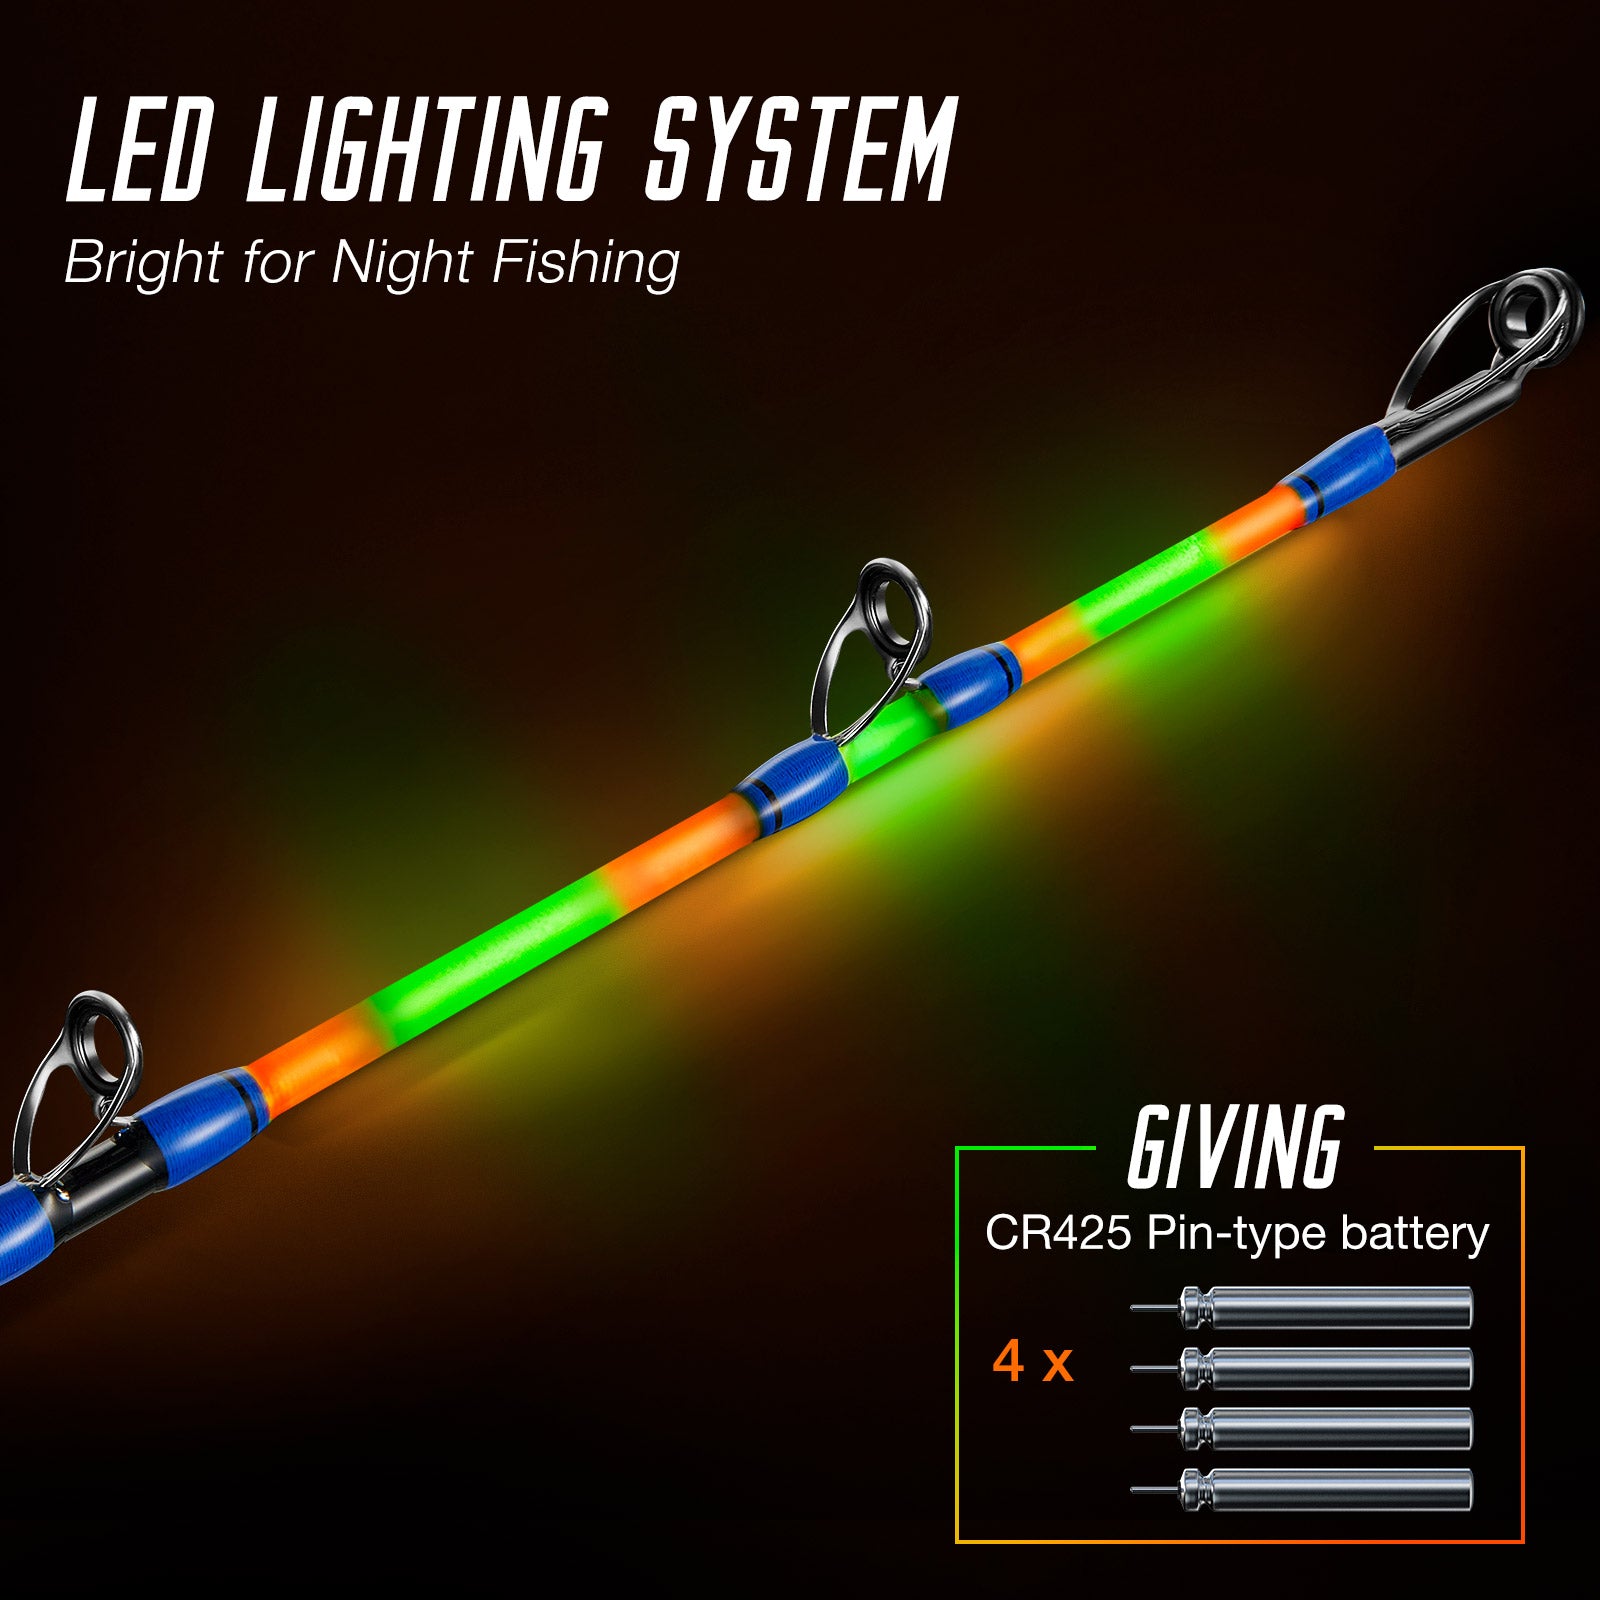 Light Up Your Night Fishing with this Intelligent Fishing Alarm!